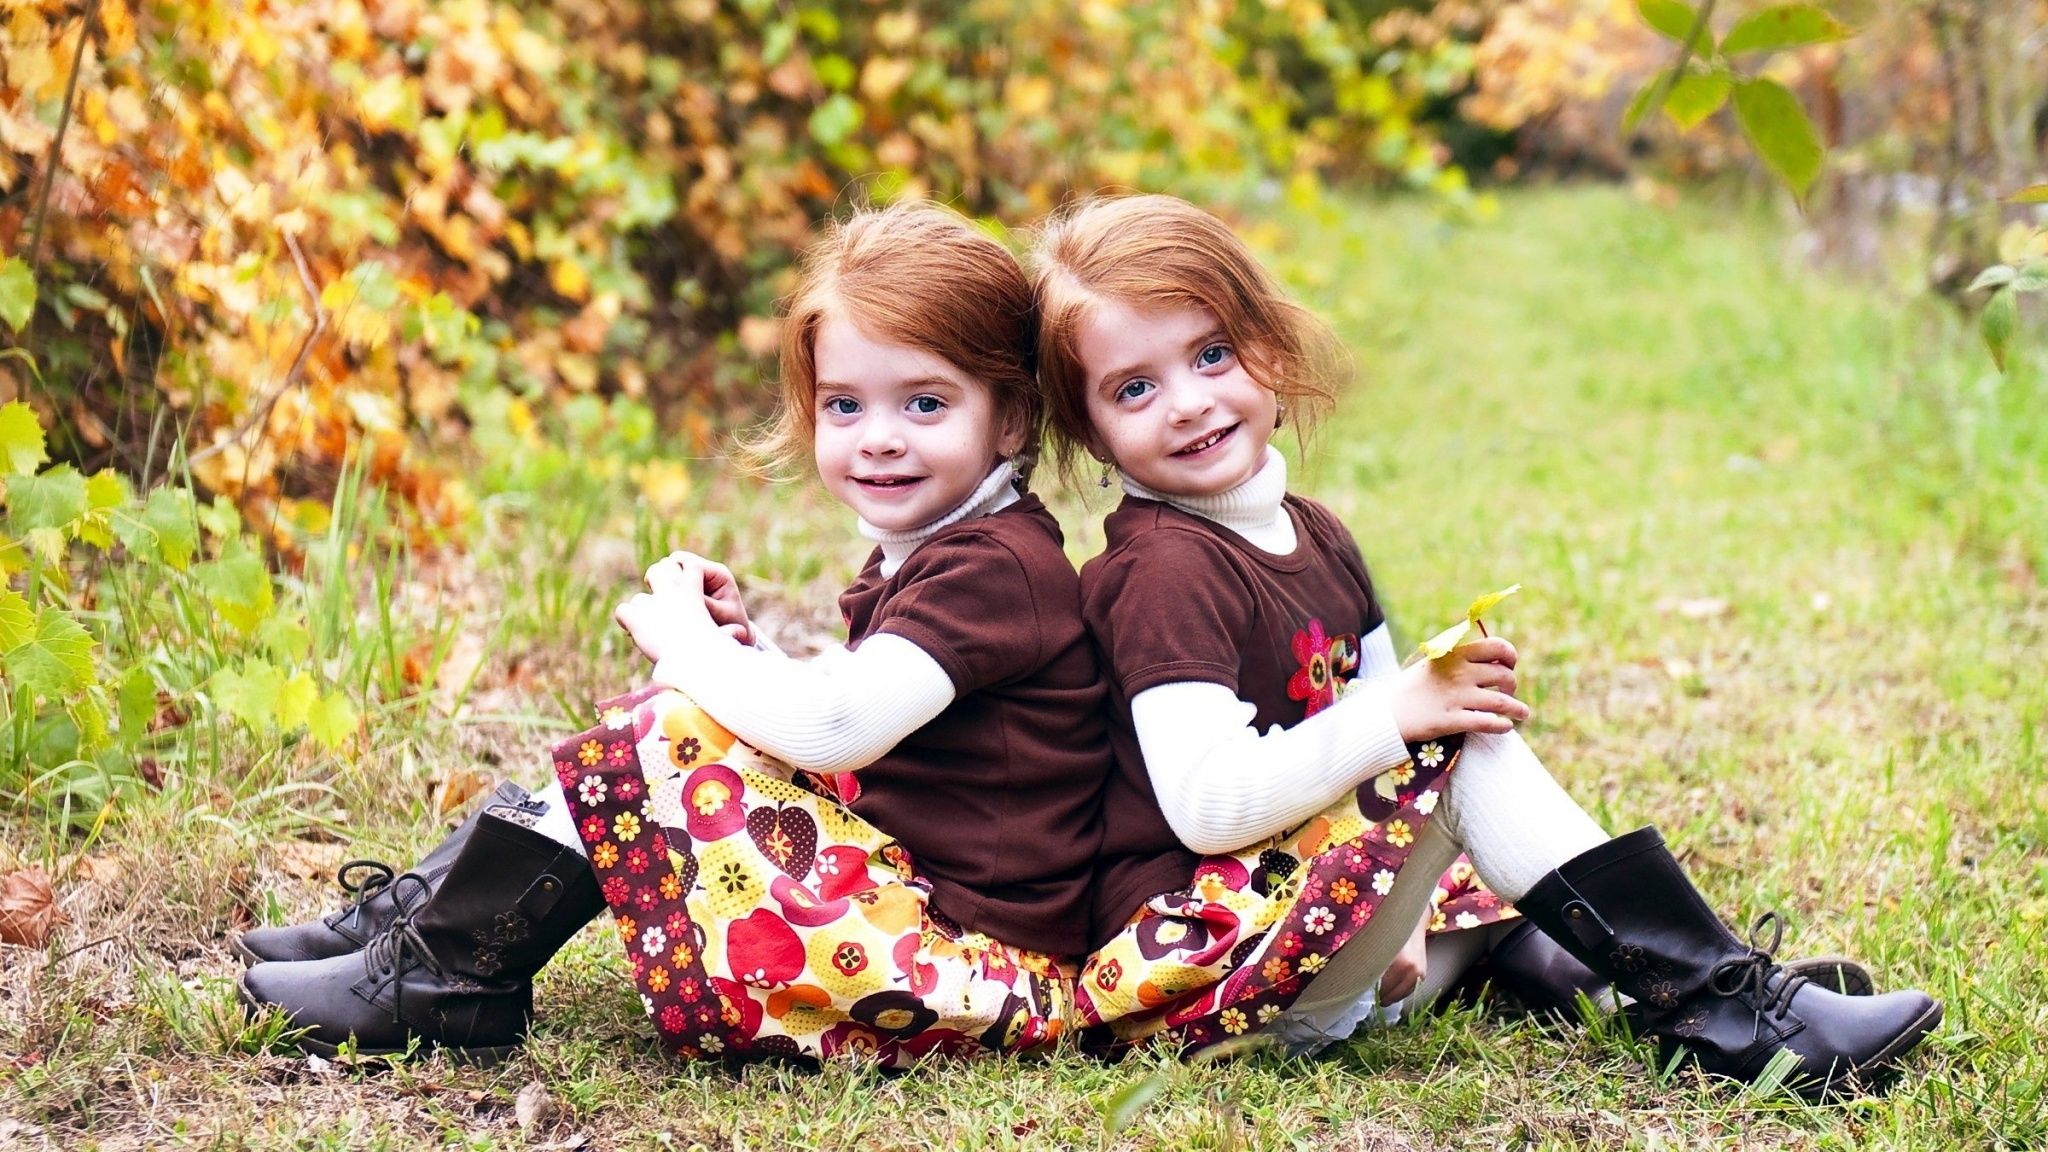 Girl Twins Wallpapers Wallpaper Cave